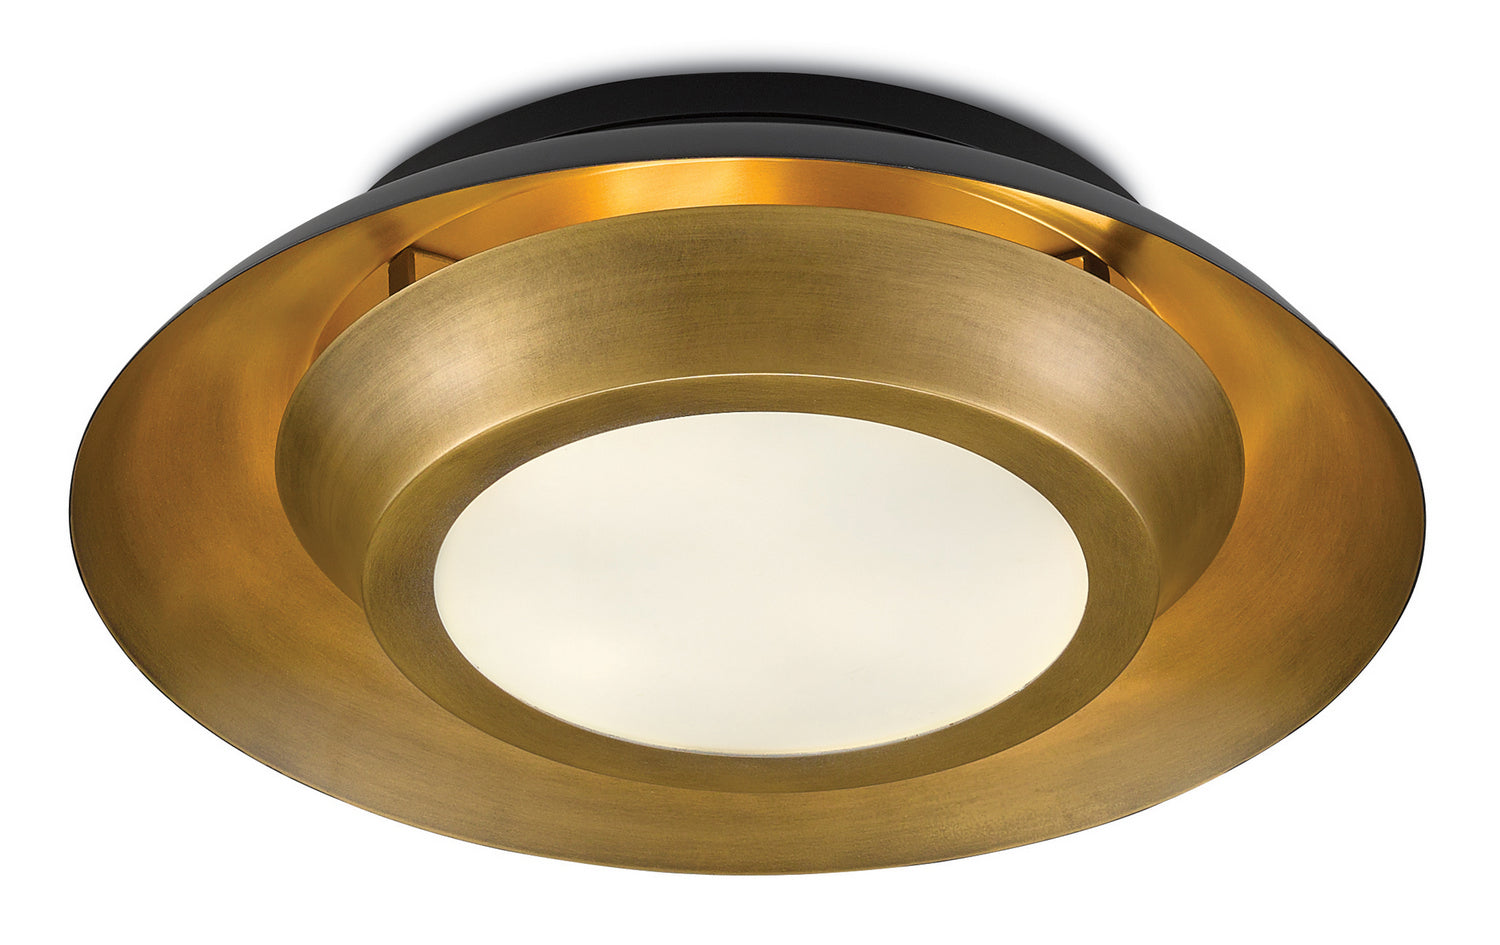 Three Light Flush Mount from the Metaphor collection in Painted Antique Brass/Painted Black finish